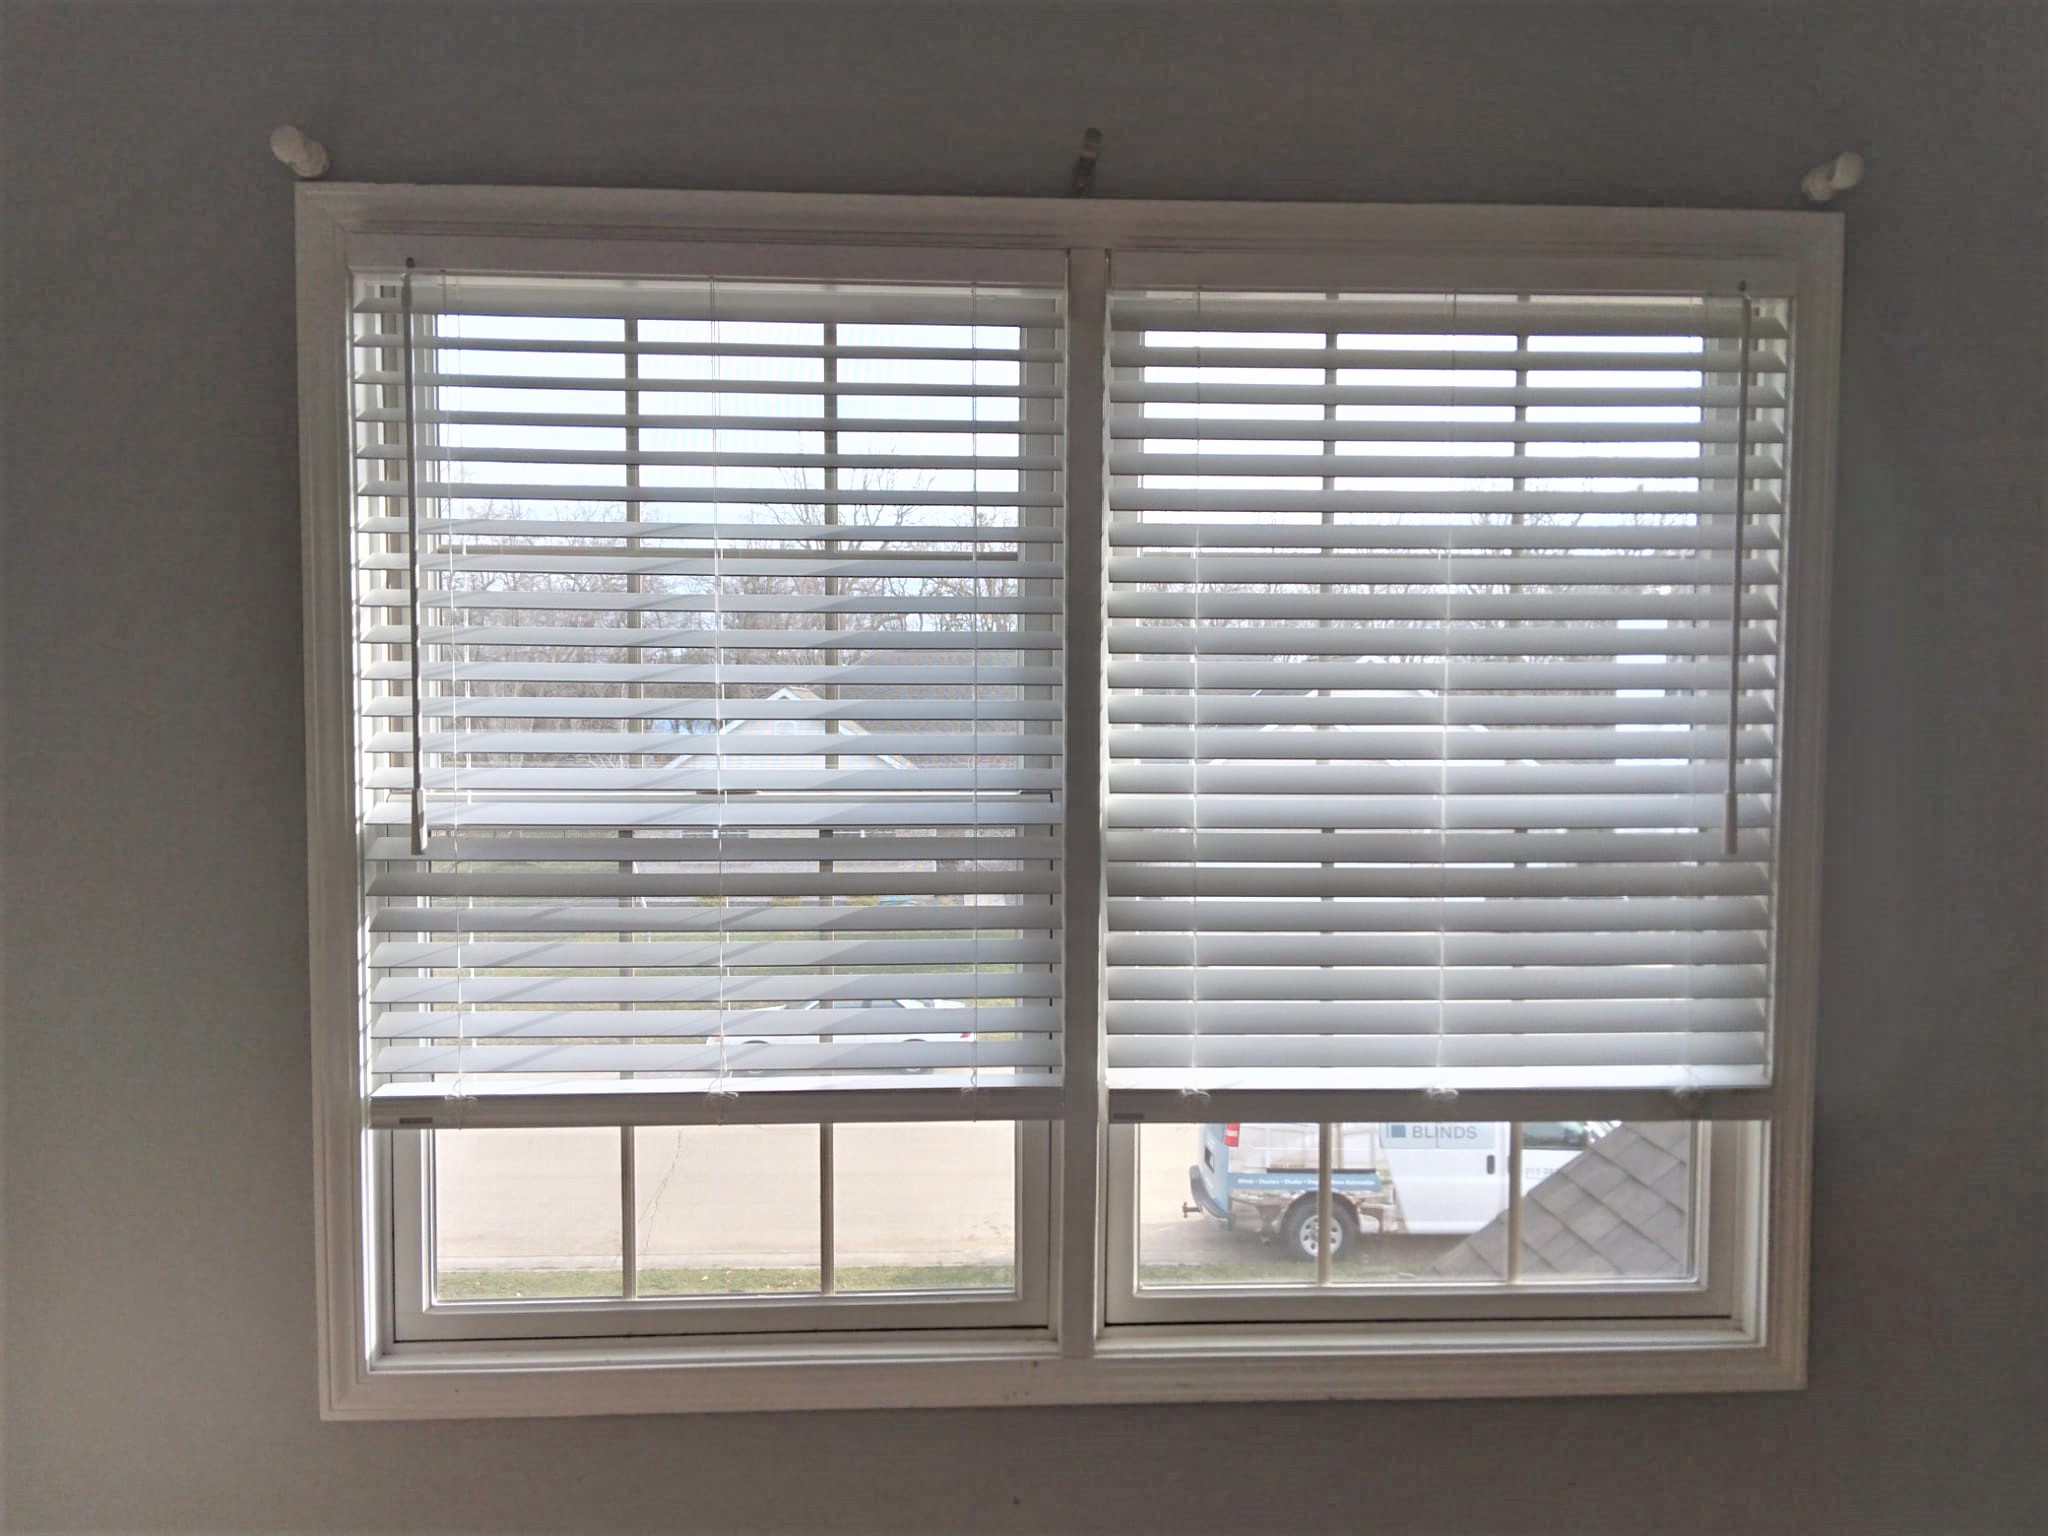 Faux wood blinds are the perfect option for this Springfield Illinois bedroom. Blinds allow the light to come in even when they are fully lowered. And the cordless option makes sure that they are safe for children and pets.  BudgetBlinds  Blinds  WindowCoverings  SpringfieldIllinois  Springfield